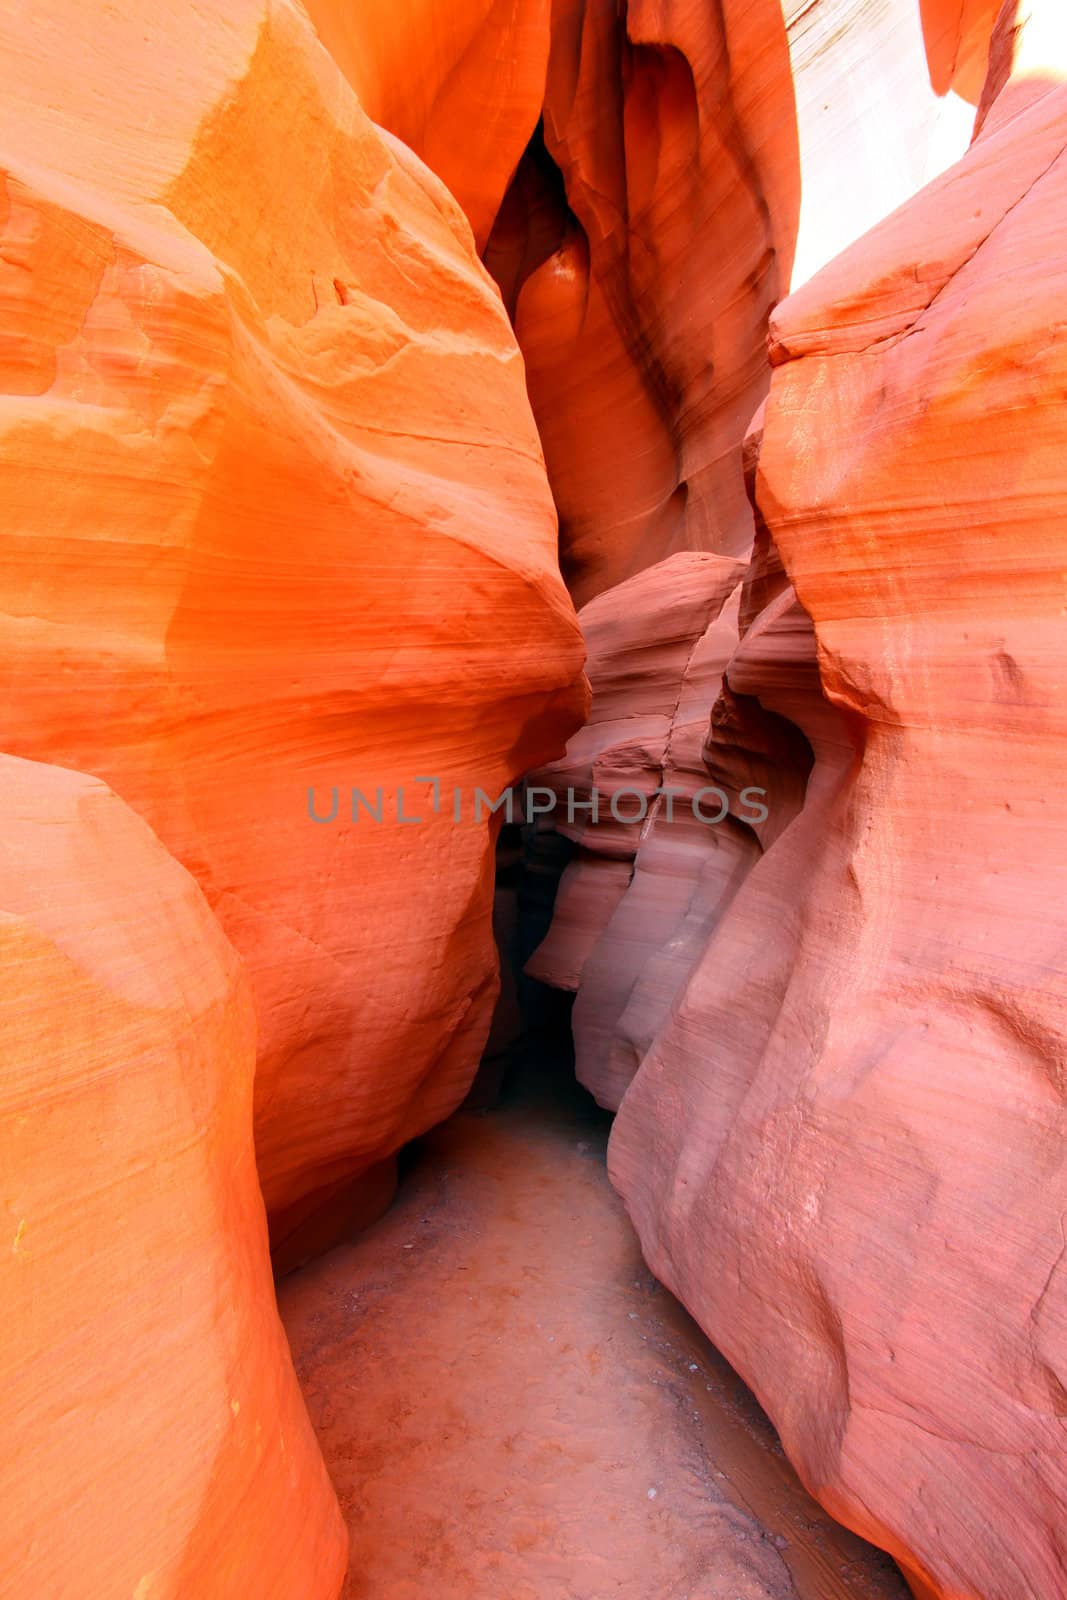 South entrance to Antelope Canyon in the deserts of Arizona.